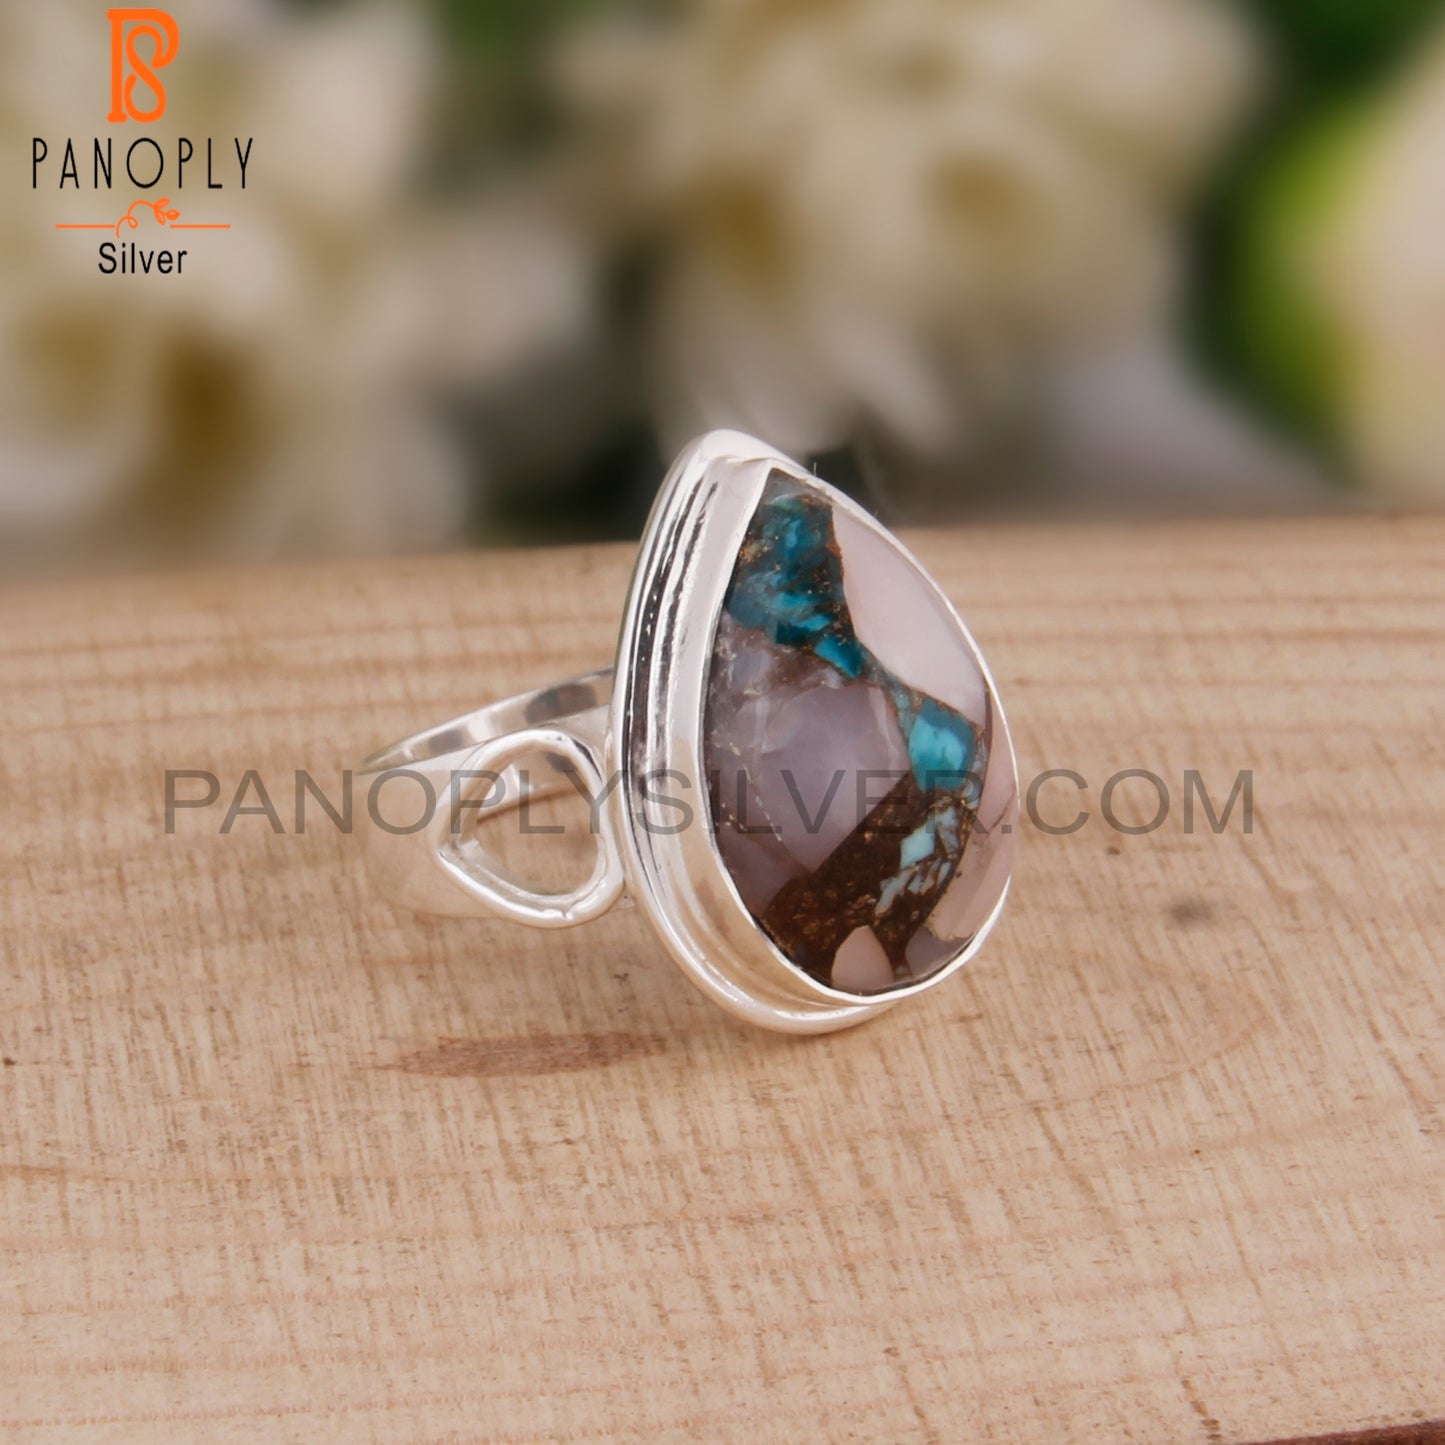 Cabochon Turquoise Pink Opal 925 Sterling Silver Cute Ring